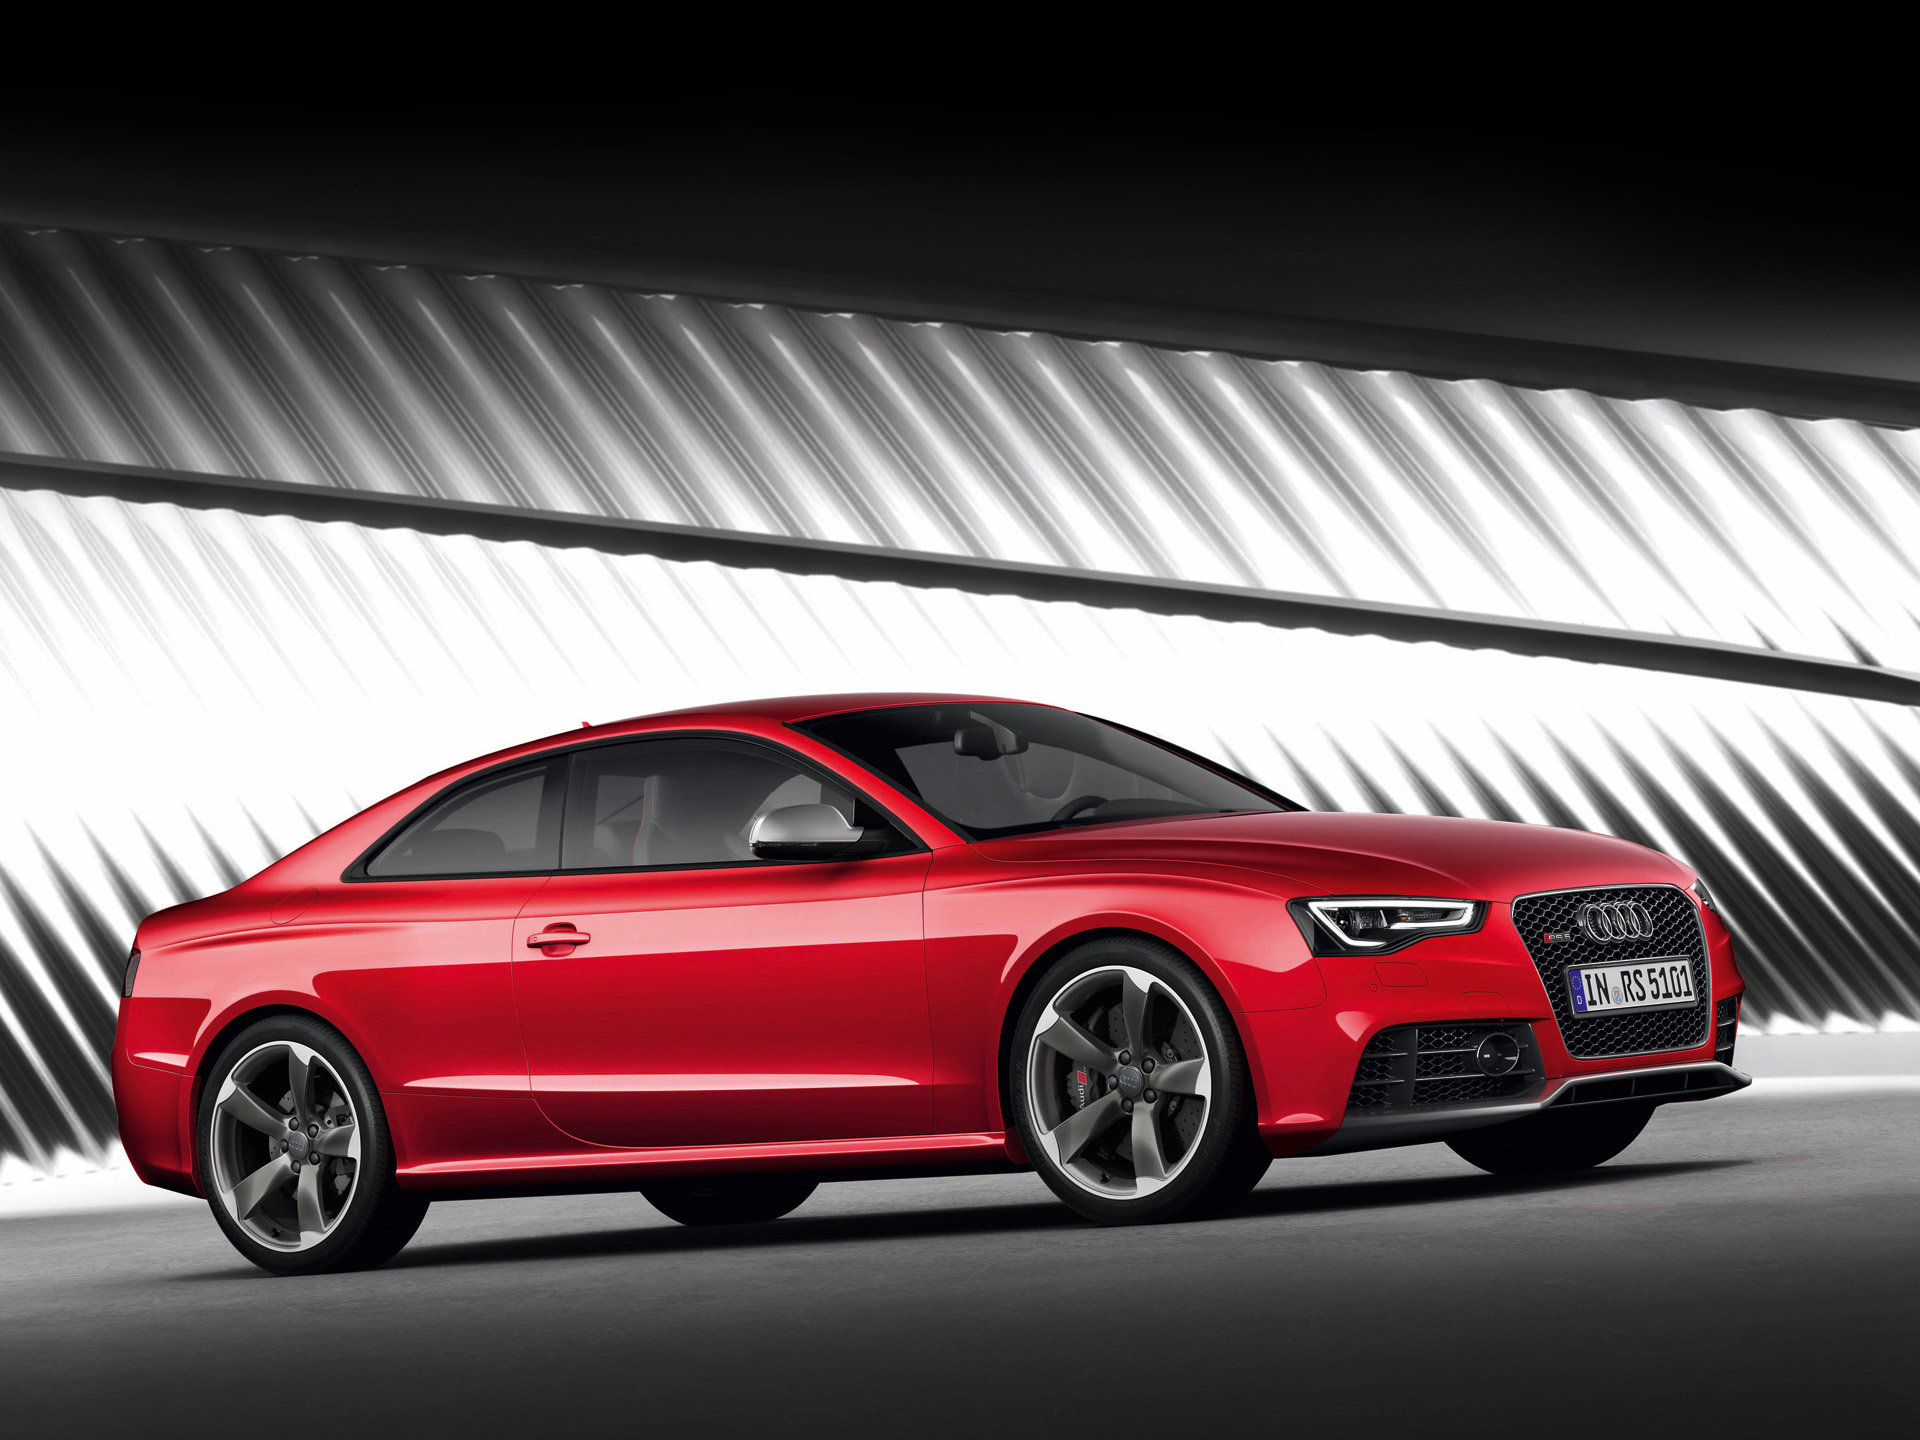 Best Audi RS5 wallpaper ID:160248 for High Resolution hd 1920x1440 computer